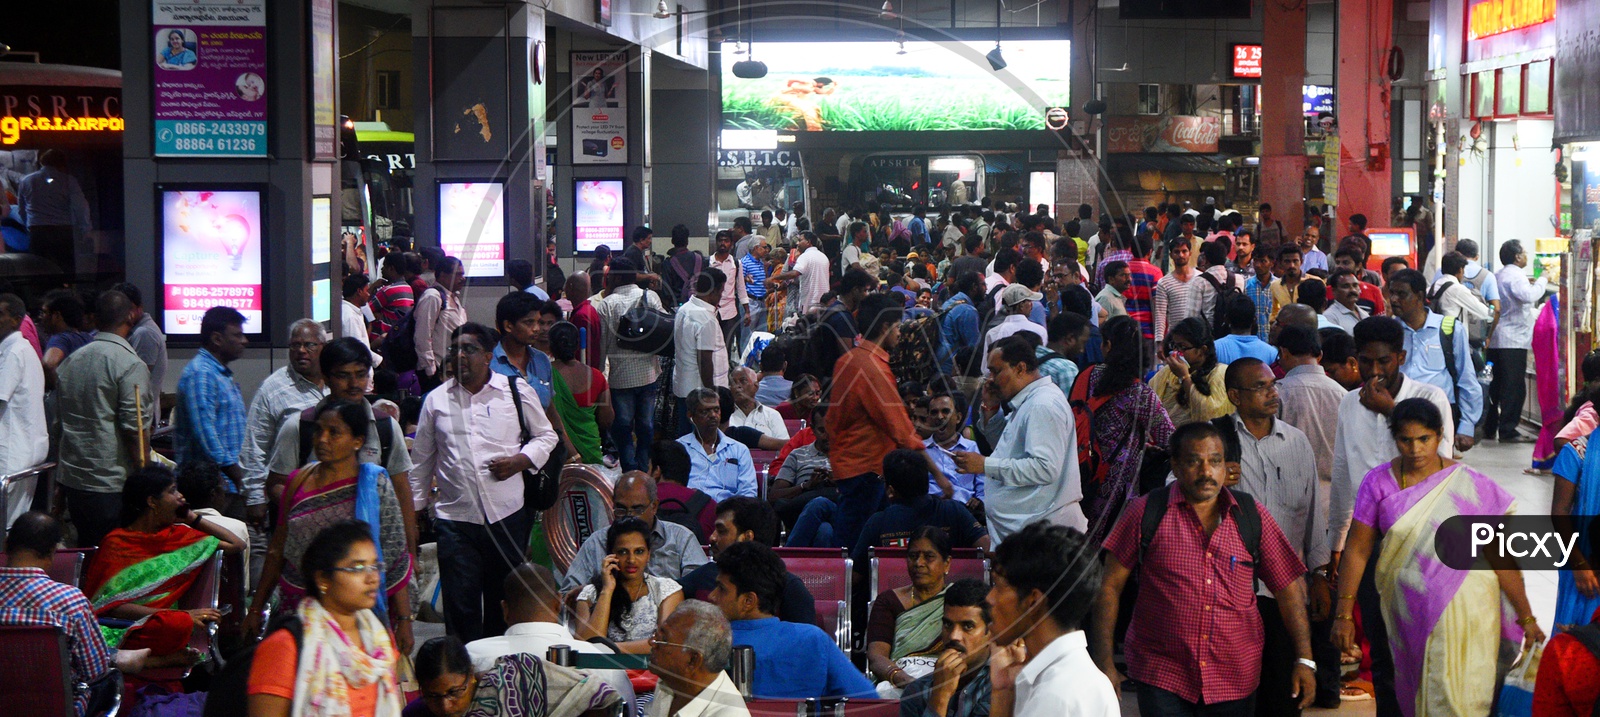 Passengers Waiting in a Railway Station